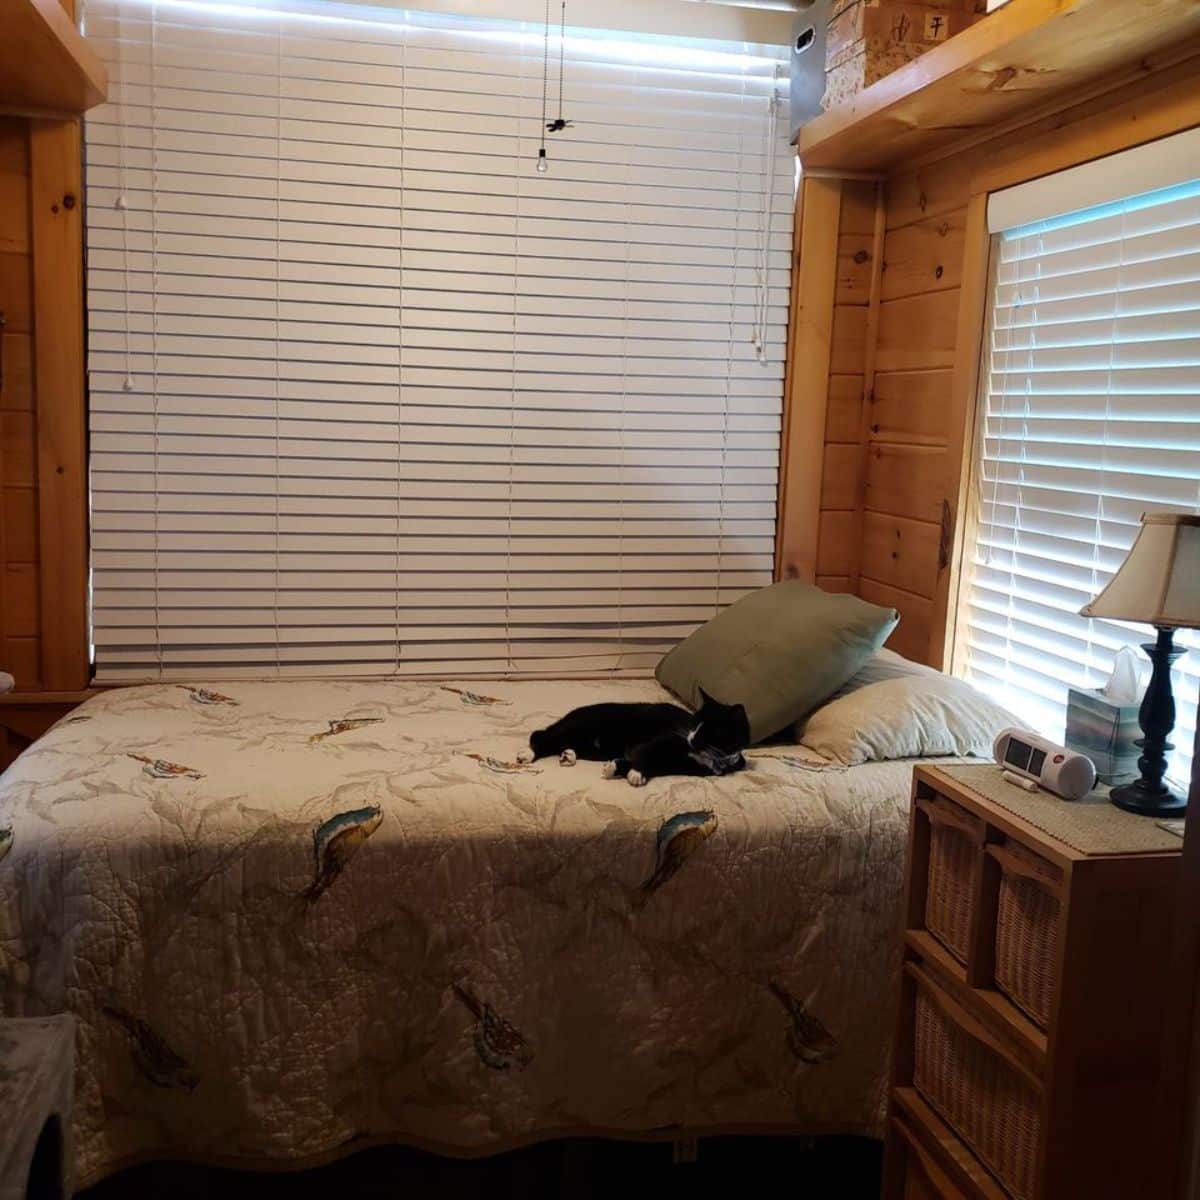 single sleeping bed in bedroom of container tiny home